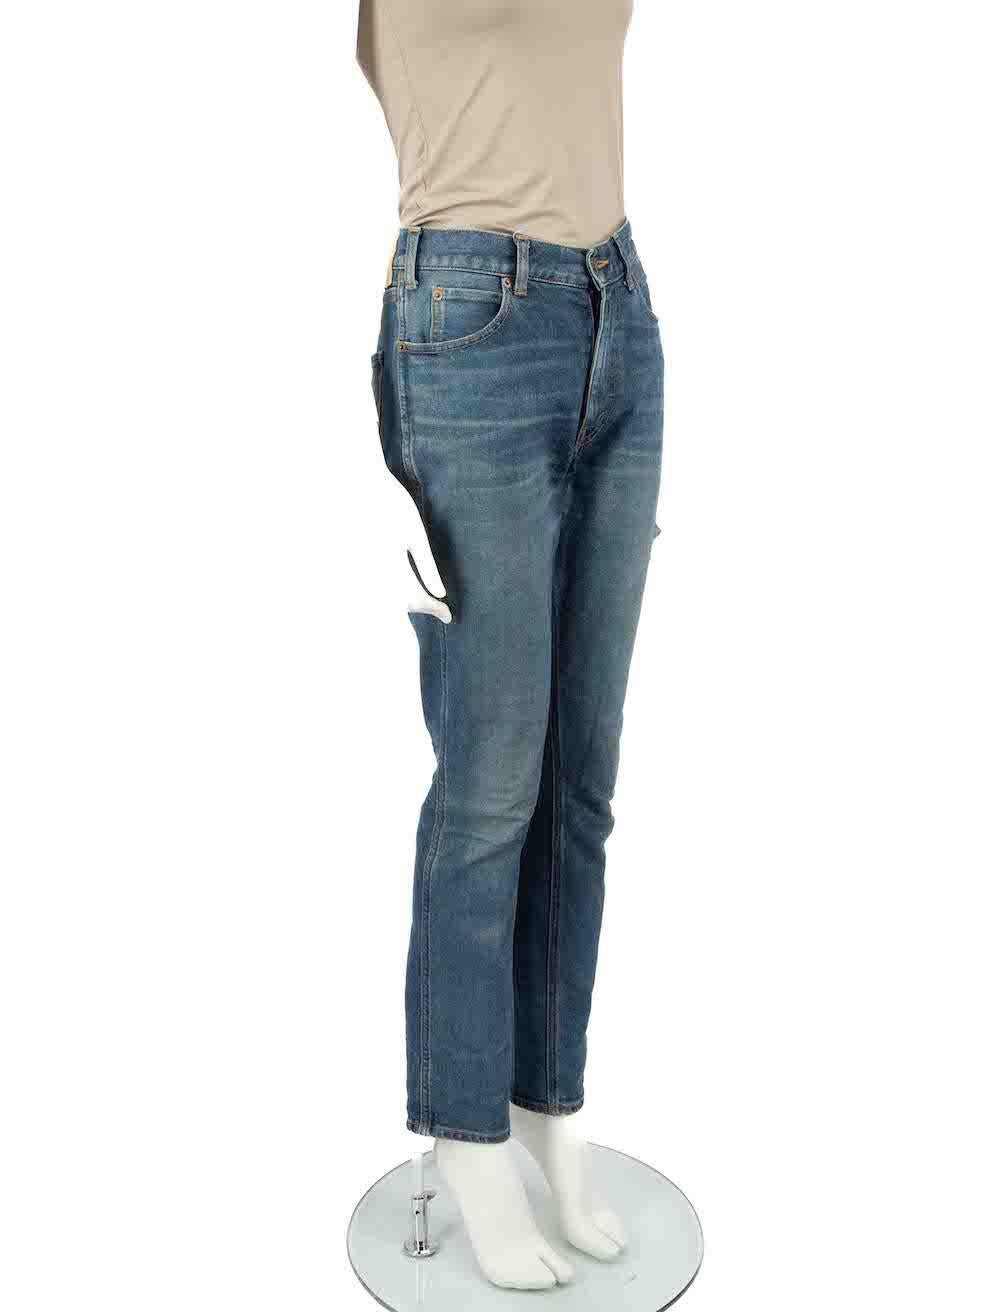 CONDITION is Very good. Hardly any visible wear to jeans is evident on this used Céline designer resale item.

Details
Blue
Cotton
Slim fit trousers
Mid rise
Stone washed accent
Front zip closure with button
Belt hoops
2x Front side pockets
2x Back